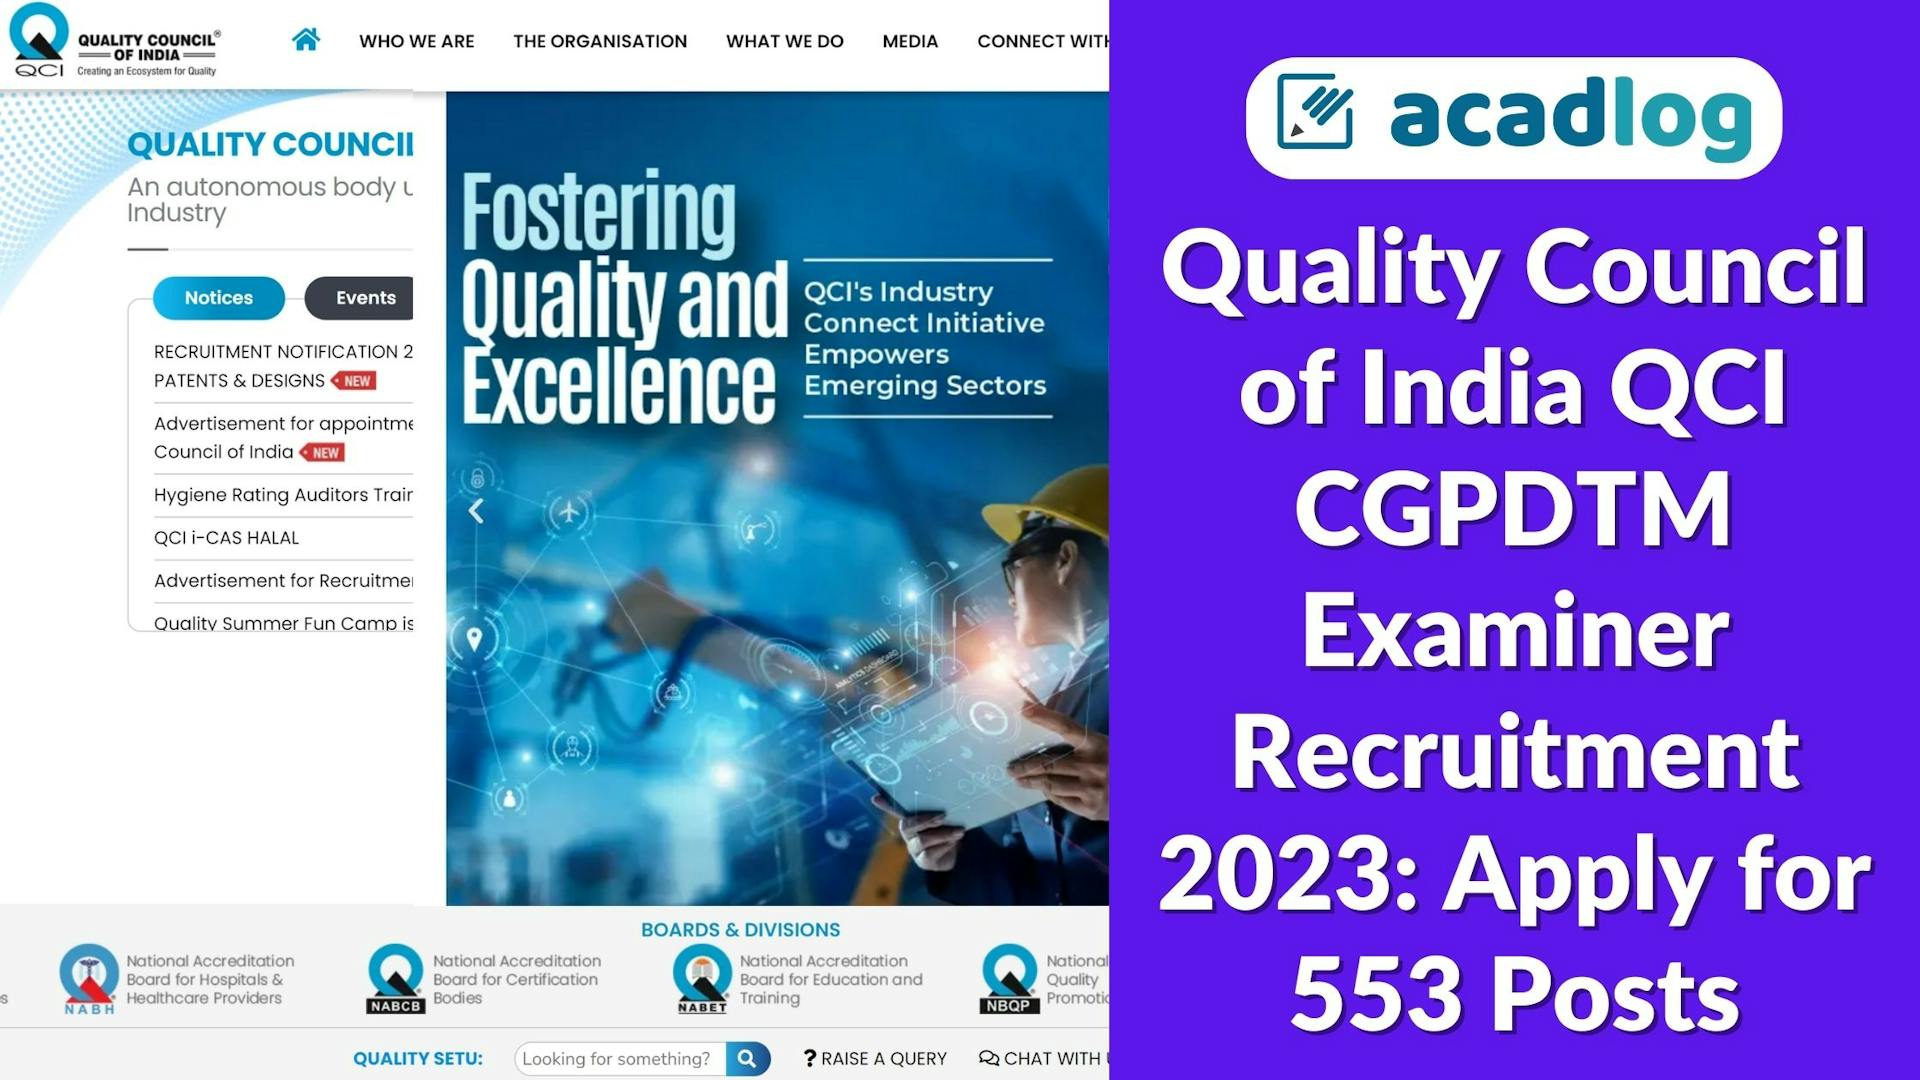 Quality Council of India QCI CGPDTM Examiner Recruitment 2023: Apply for 553 Posts